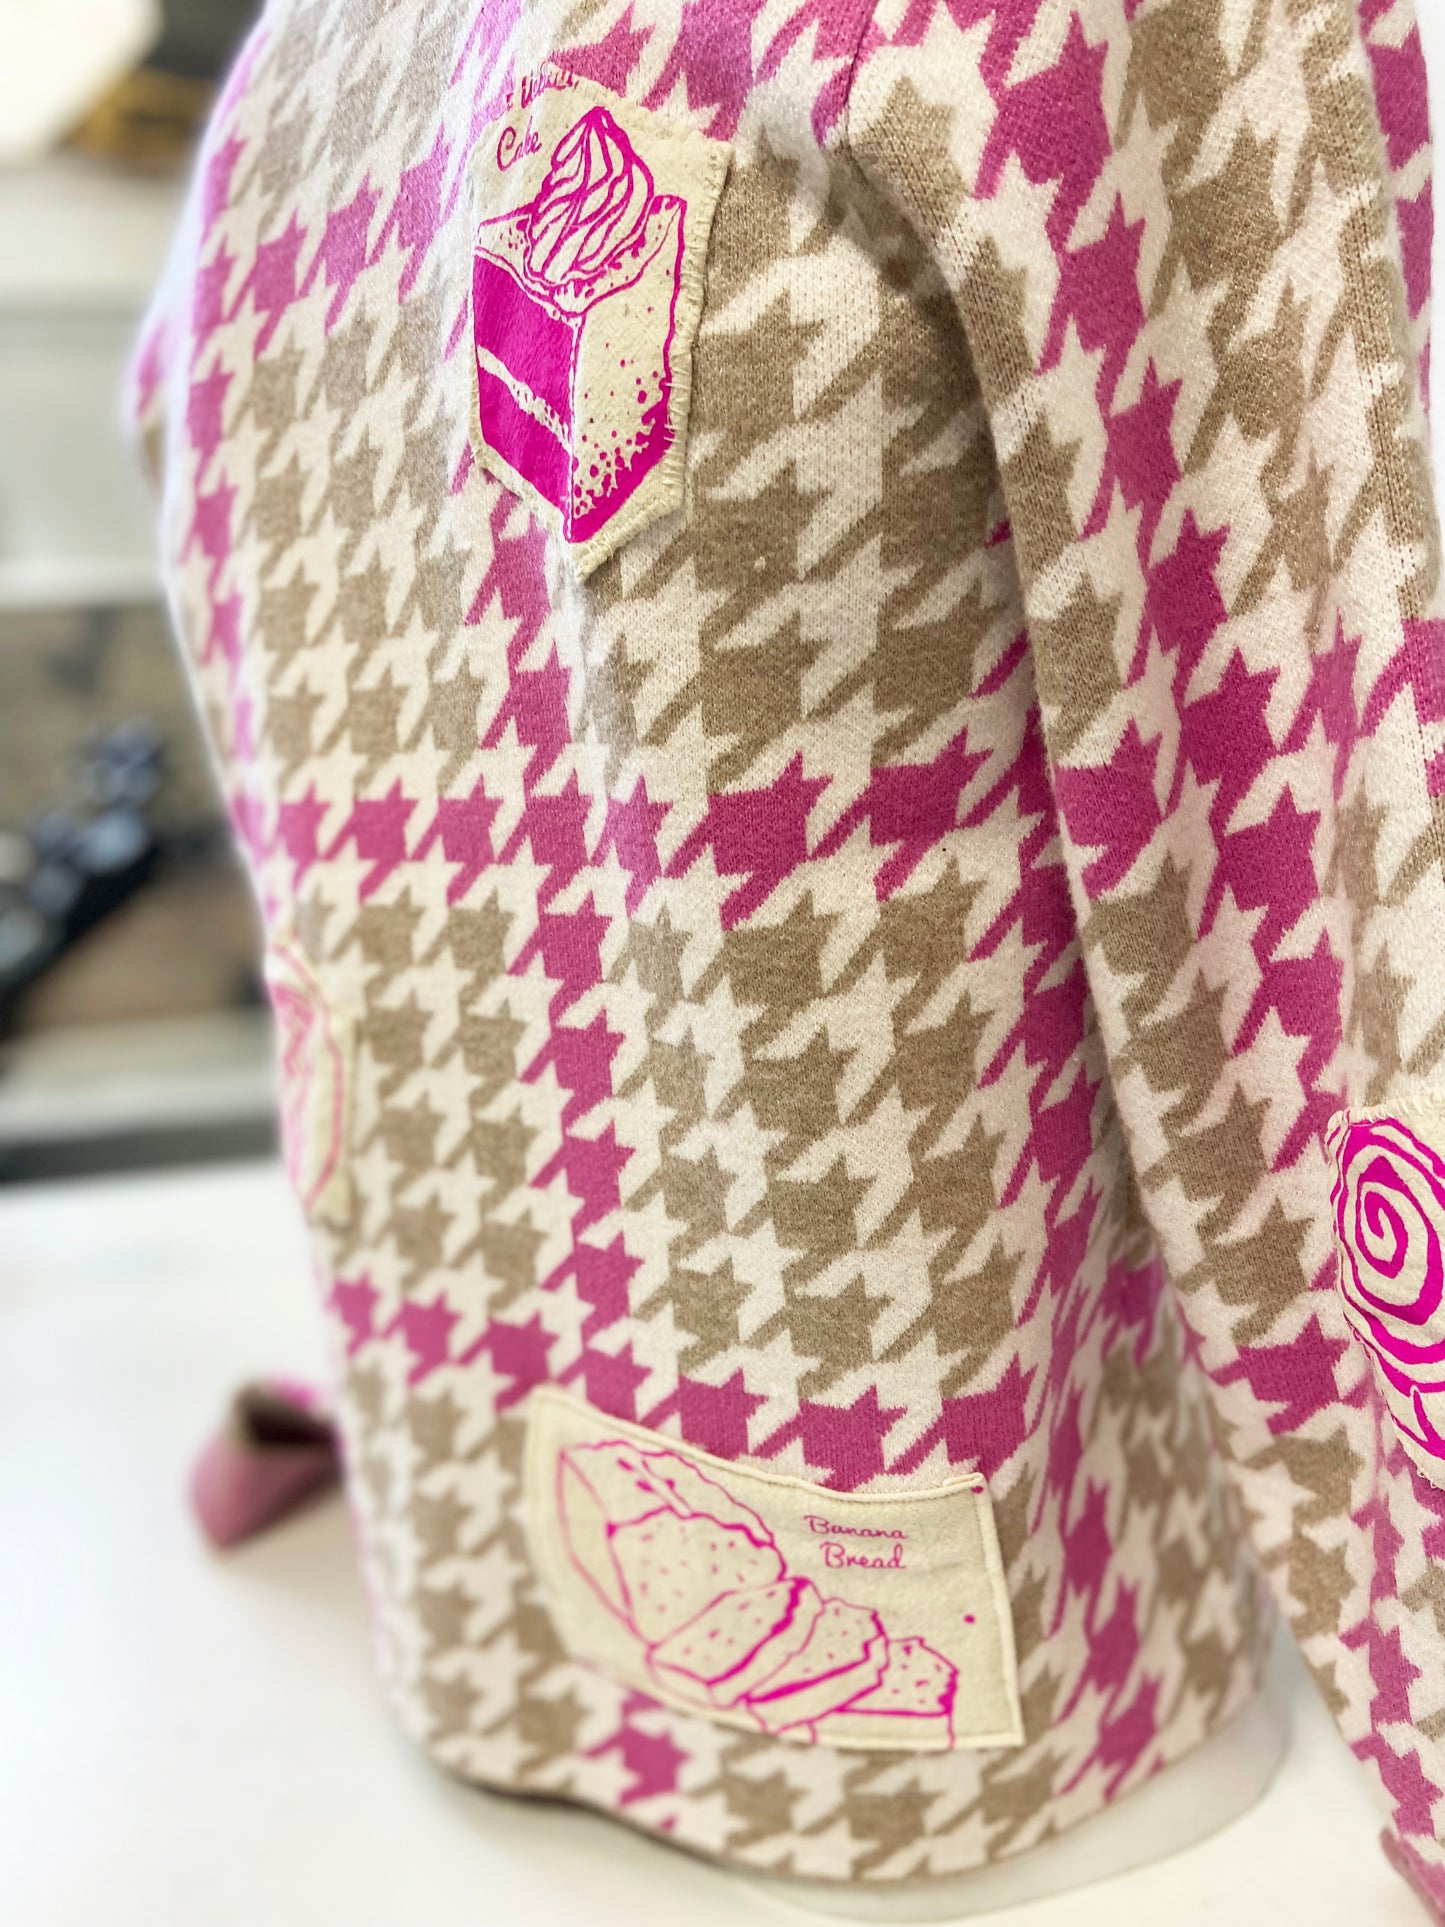 One of a Kind Hand Printed and Sewn Bakery Good Patches on Houndstooth Jacket